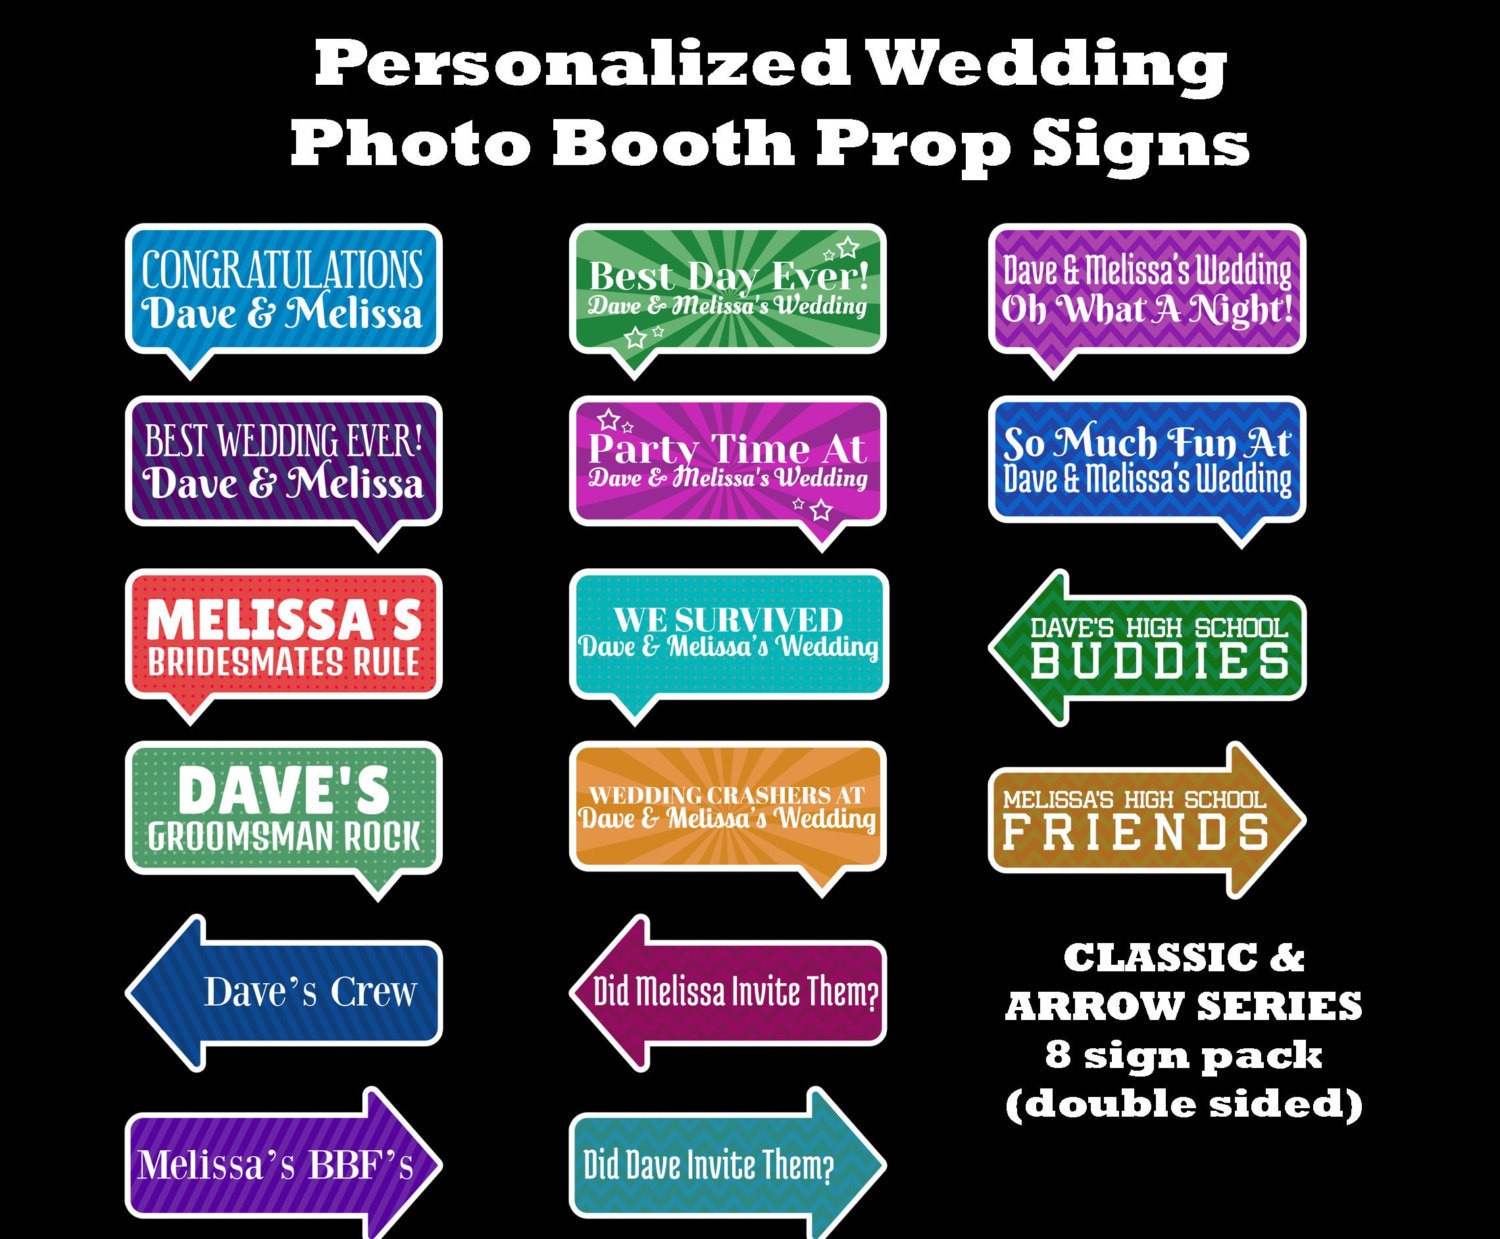 Personalized Photo Booth Wedding Prop Signs 8 Pack Double